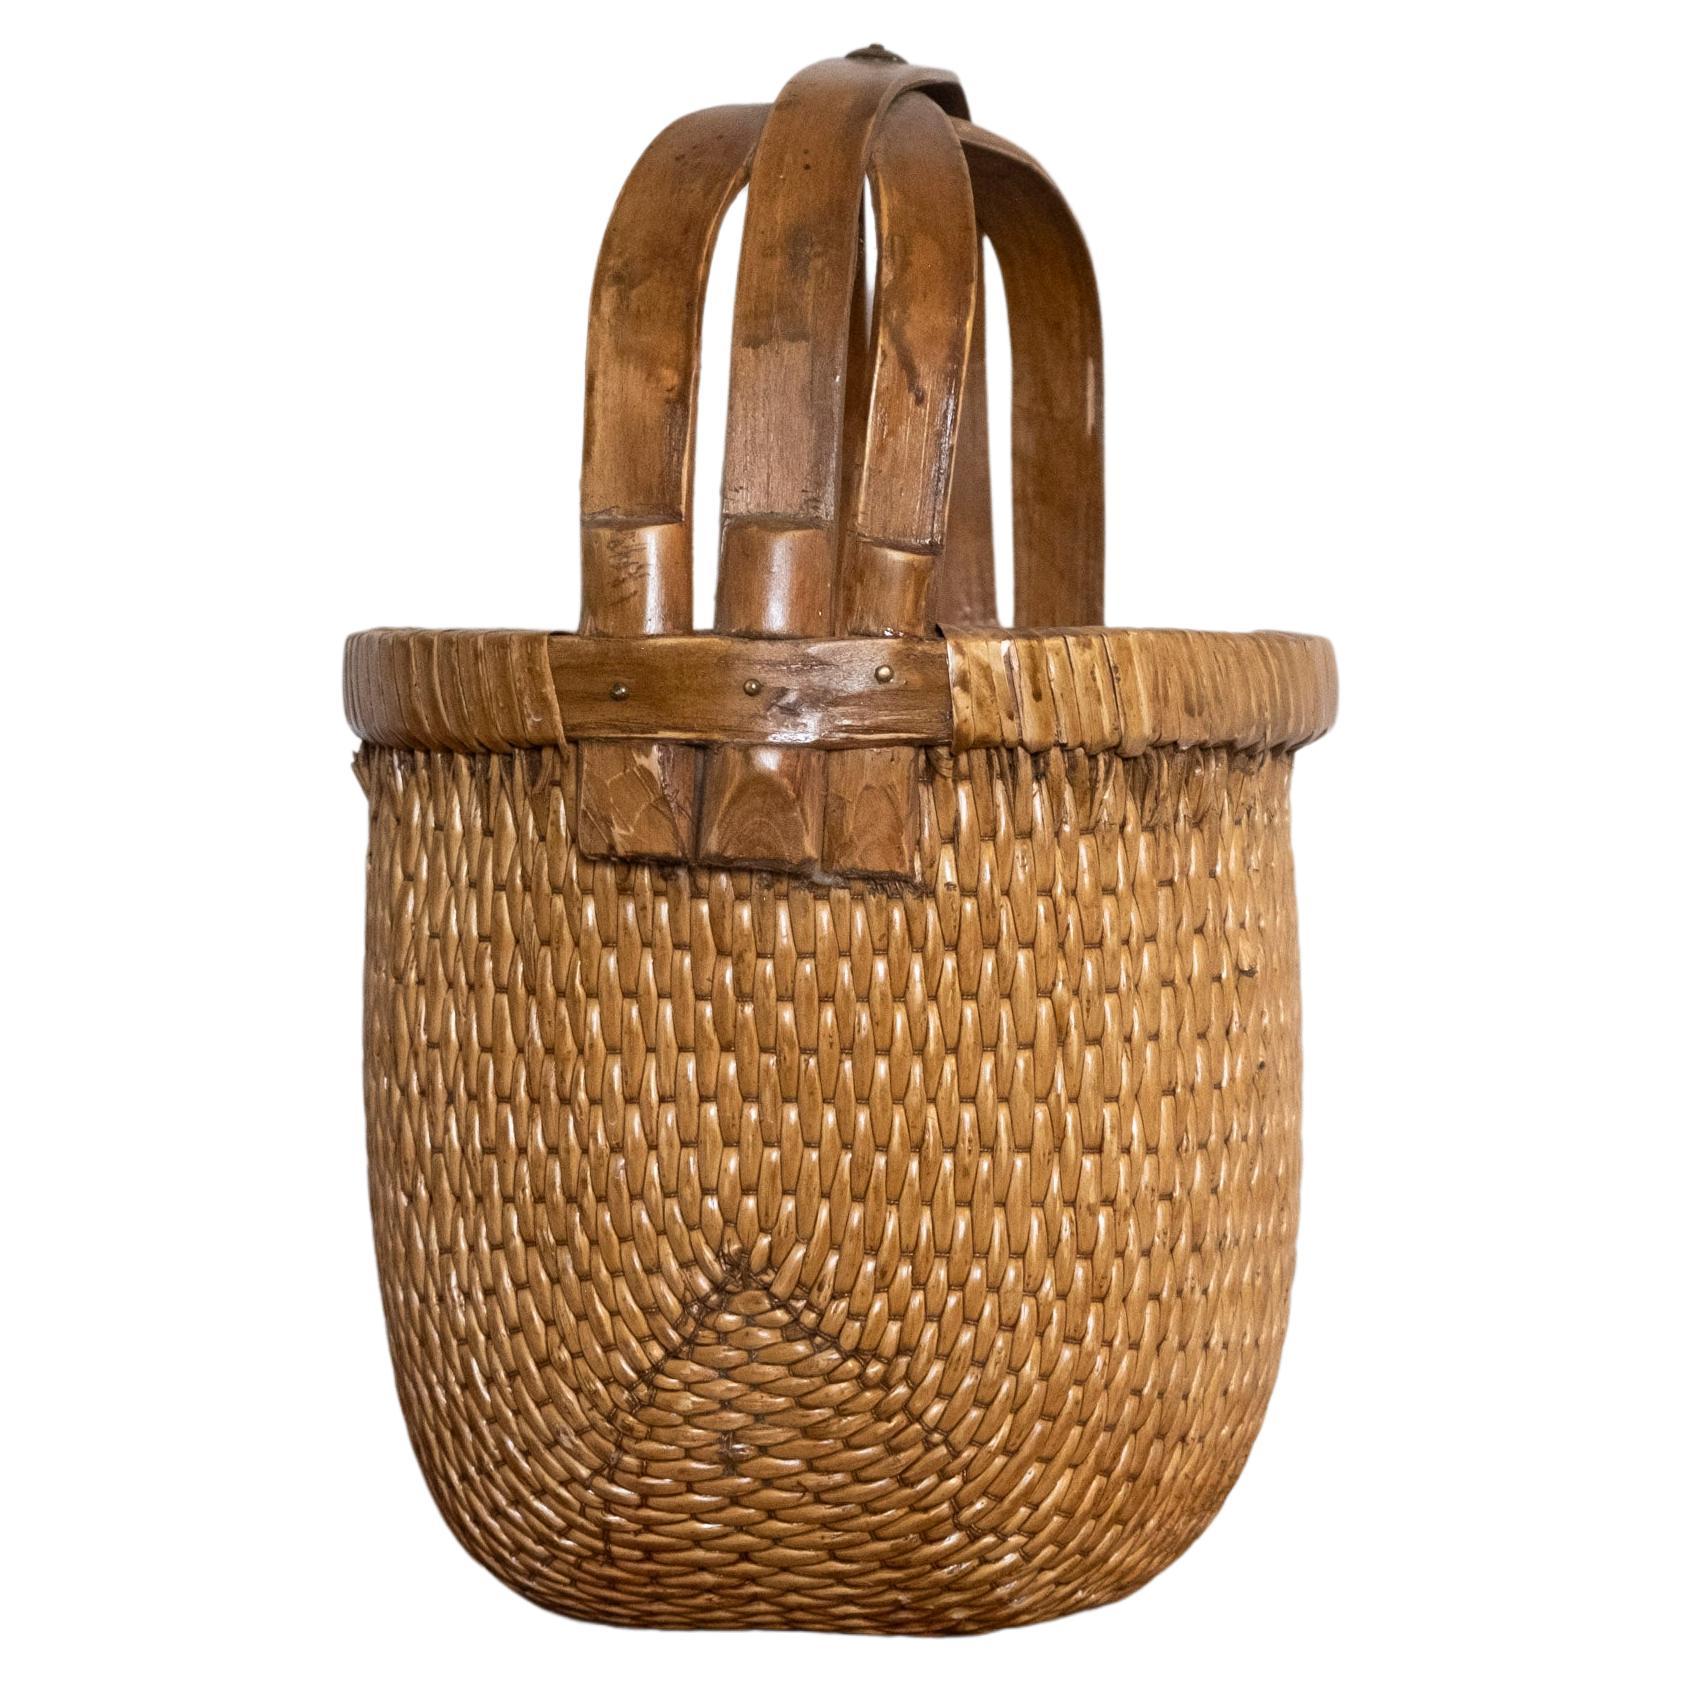 Handwoven Chinese Rice Basket